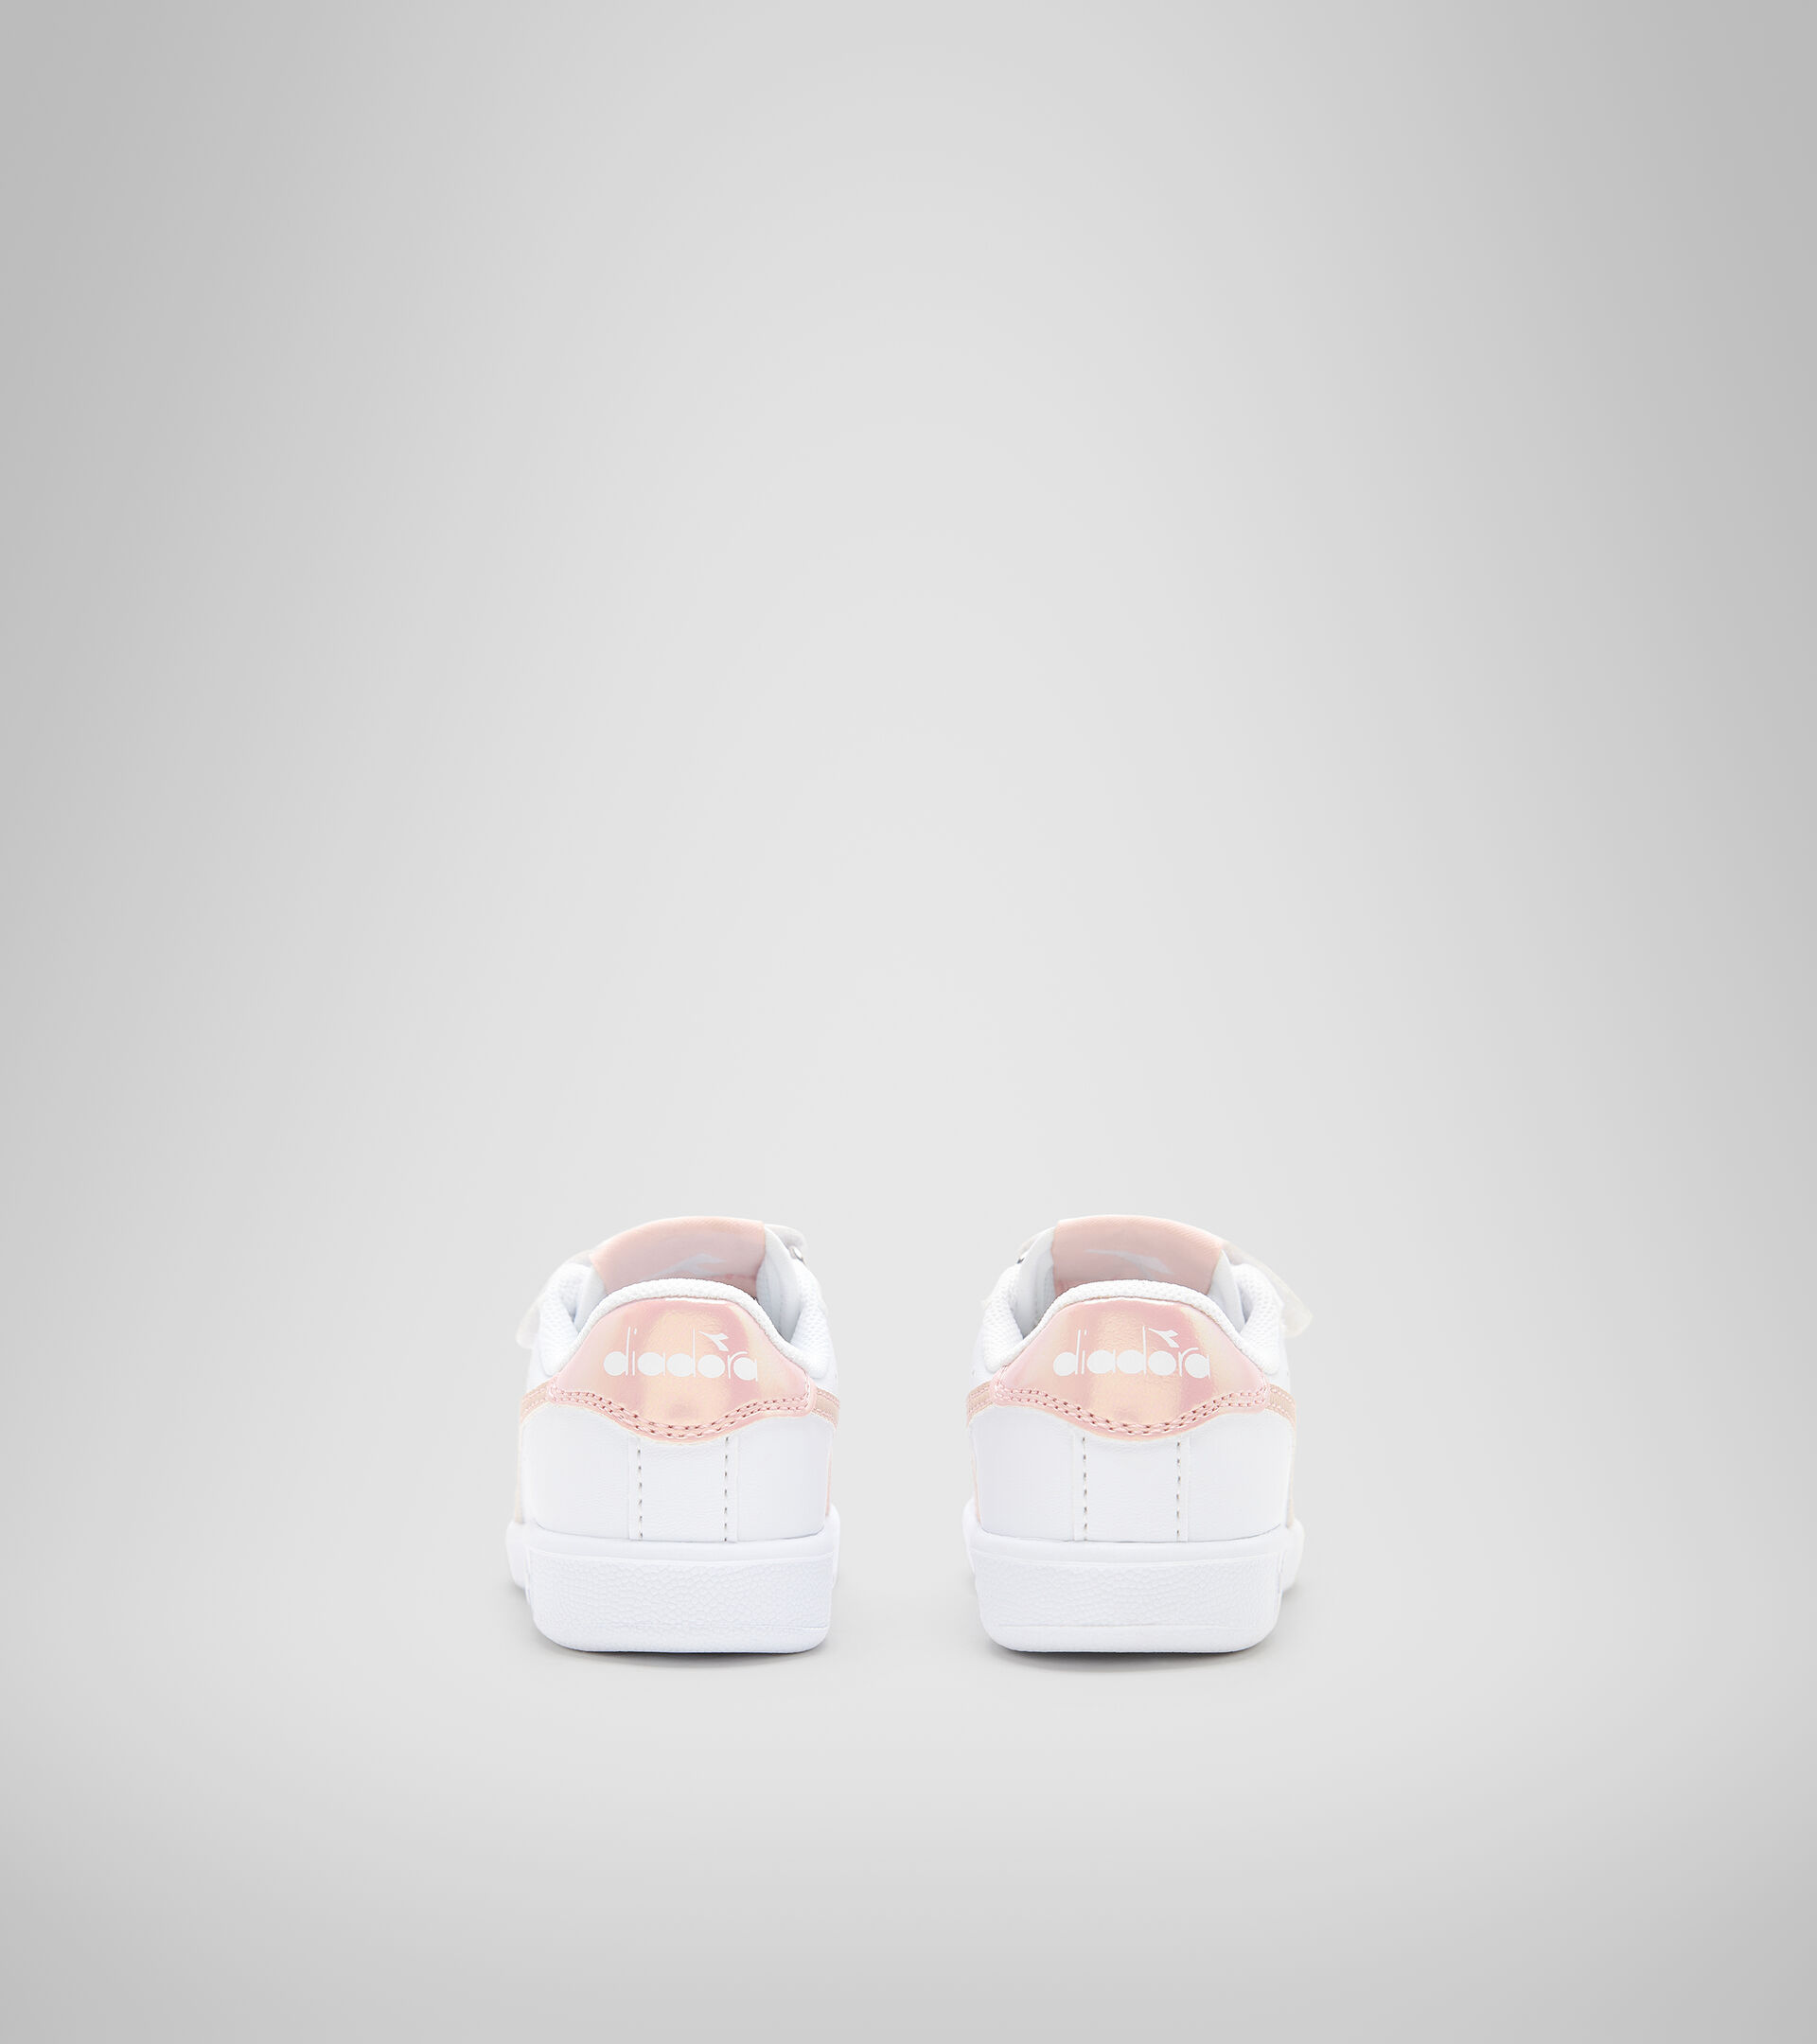 Sports shoes - Toddlers 1-4 years GAME P TD GIRL WHITE/PEACH WHIP - Diadora